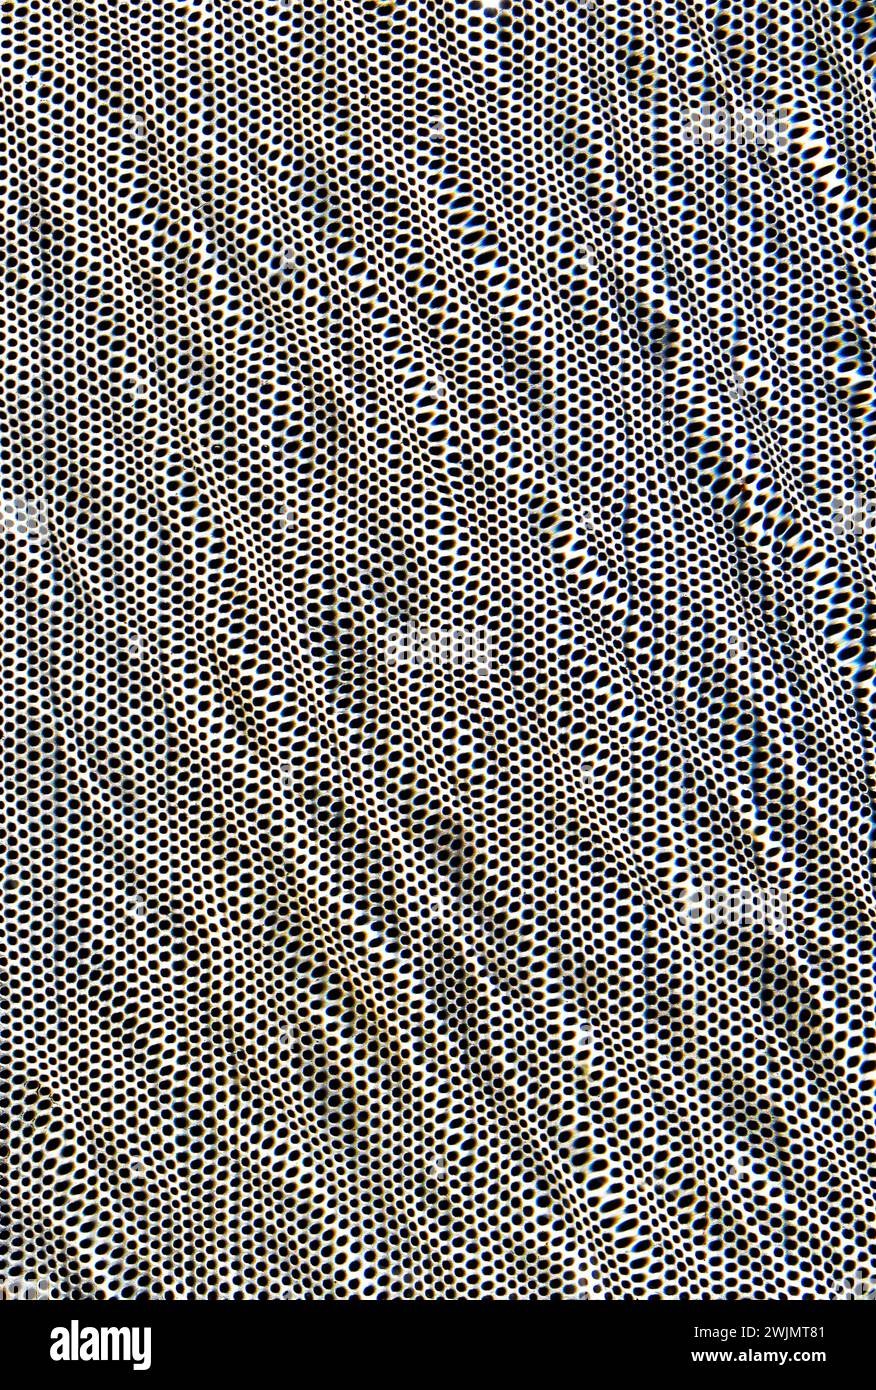 Perforated metal surface underwater texture background Stock Photo